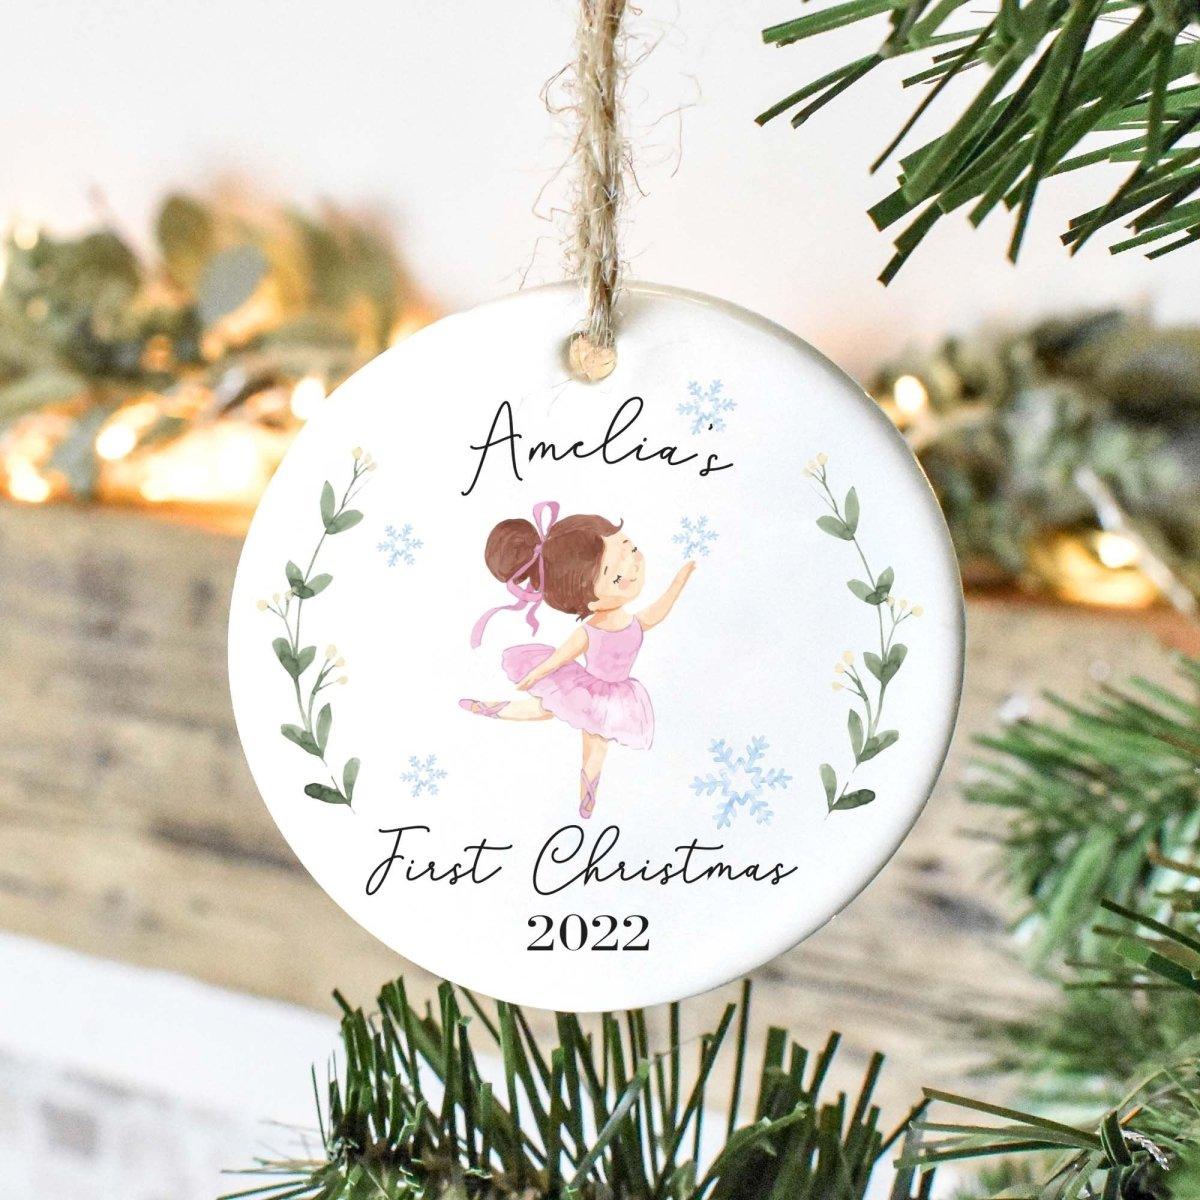 Personalised Baby 1st Christmas Bauble, Ballerina Baby Christmas Ornament, My First Christmas, Ballet Bauble, New Baby Christmas Gift, Baby - Amy Lucy